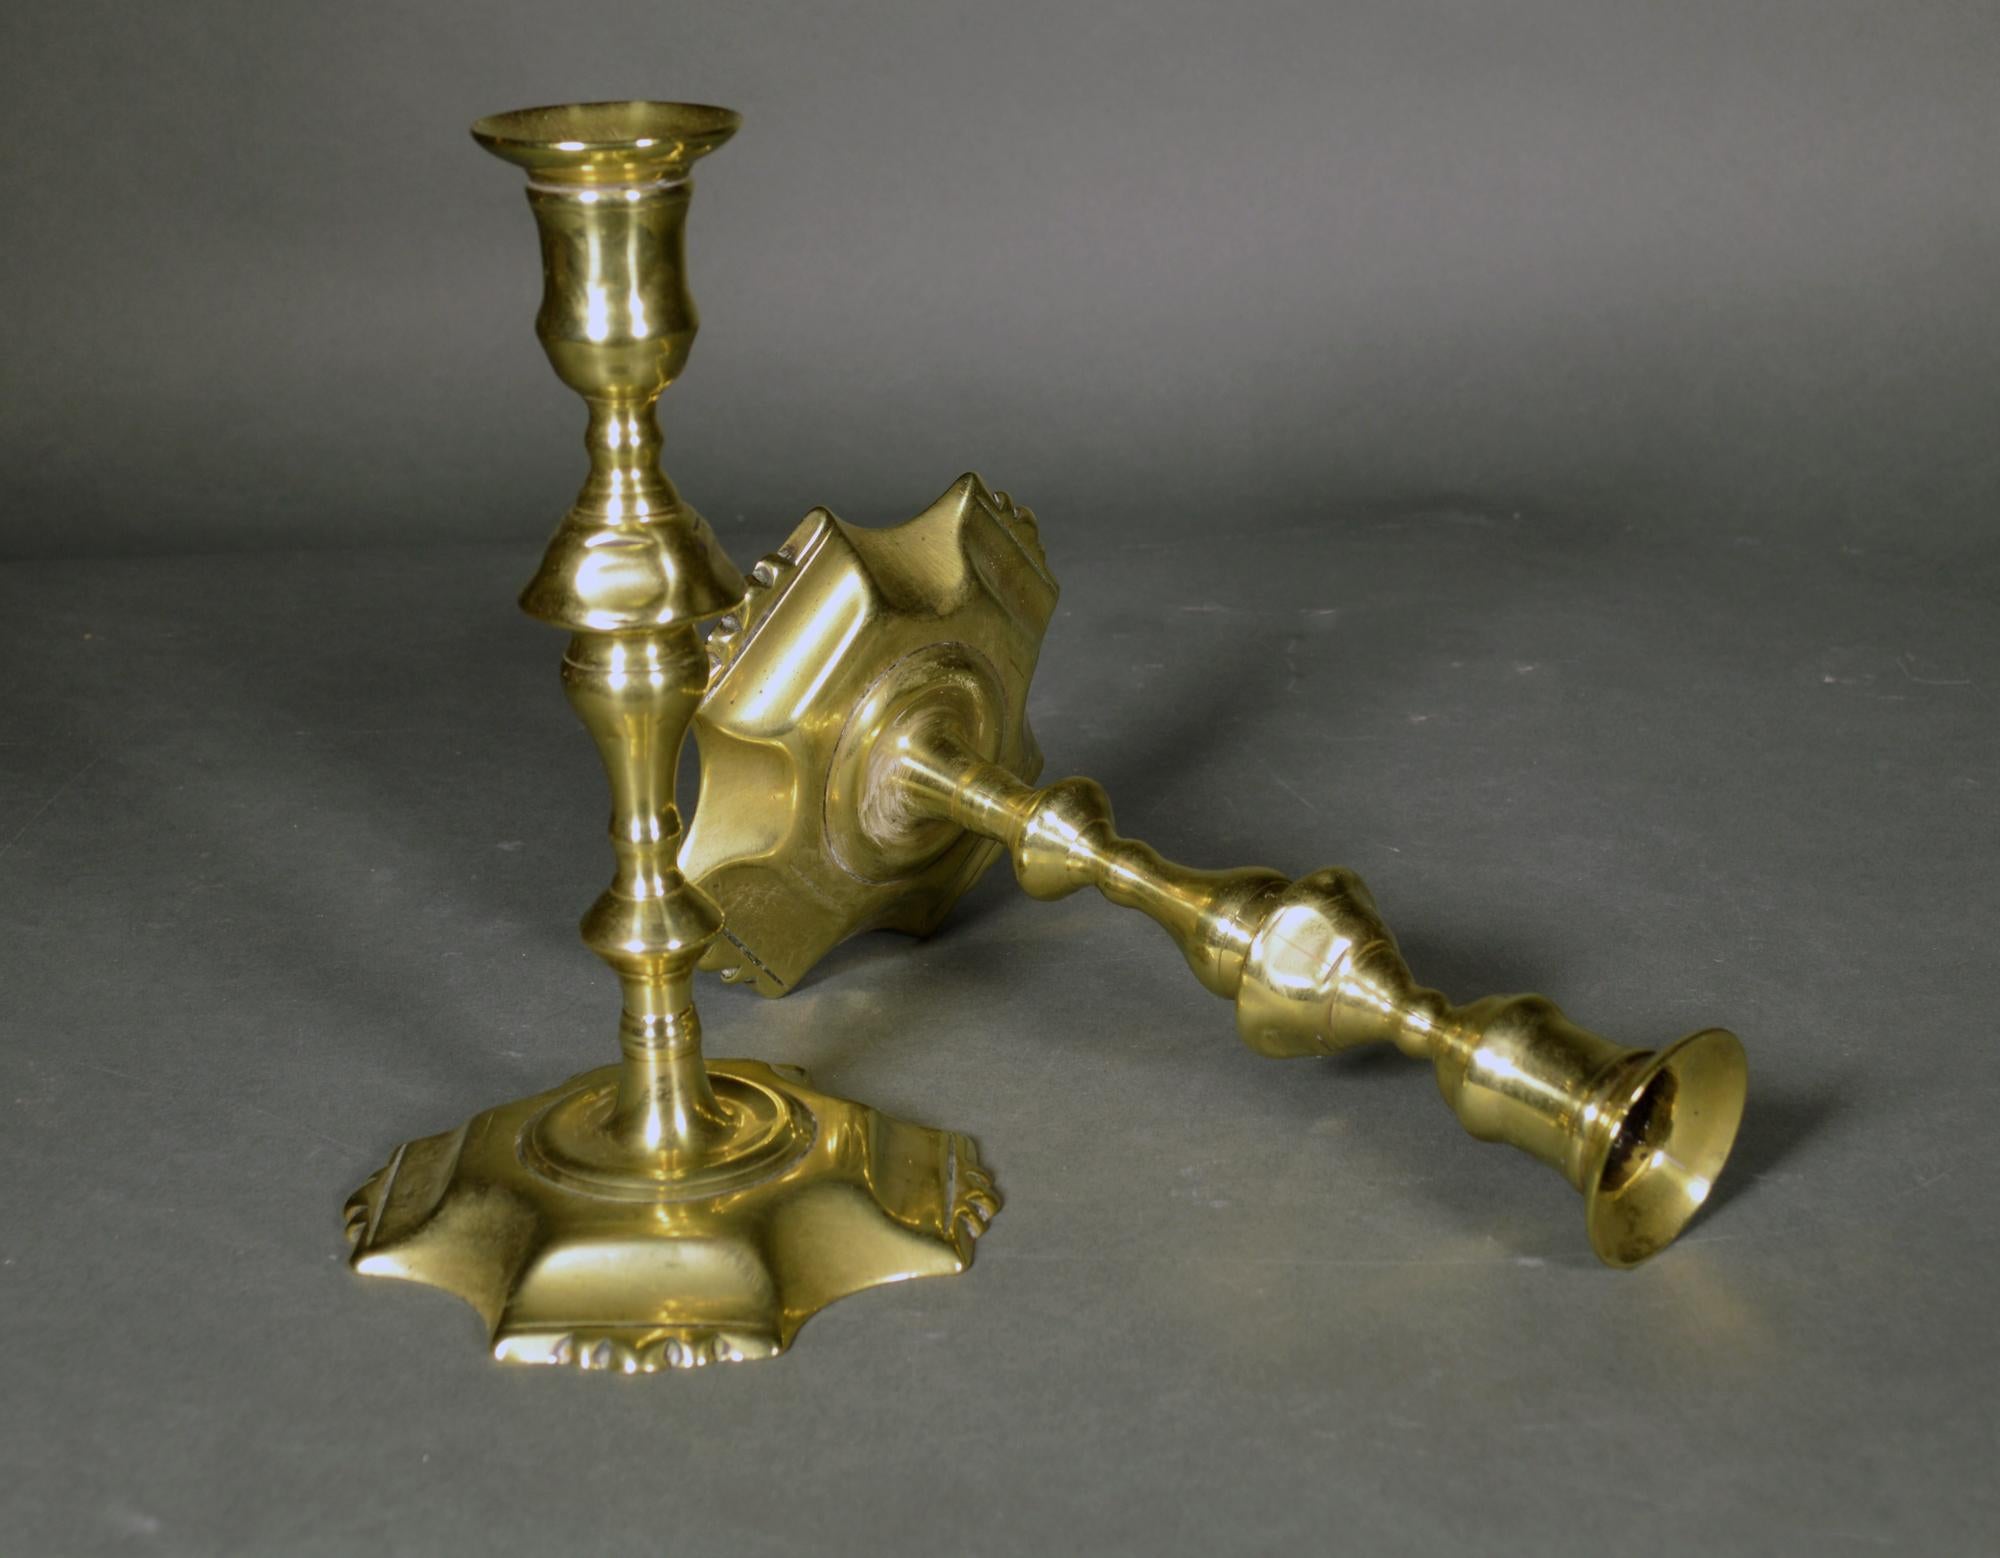 English brass petal-base candlesticks,
A pair,
circa 1760-80

The English brass candlesticks have a petal base with four sides and a concave indented design between the fluted petals. The central column with a series of projects including the